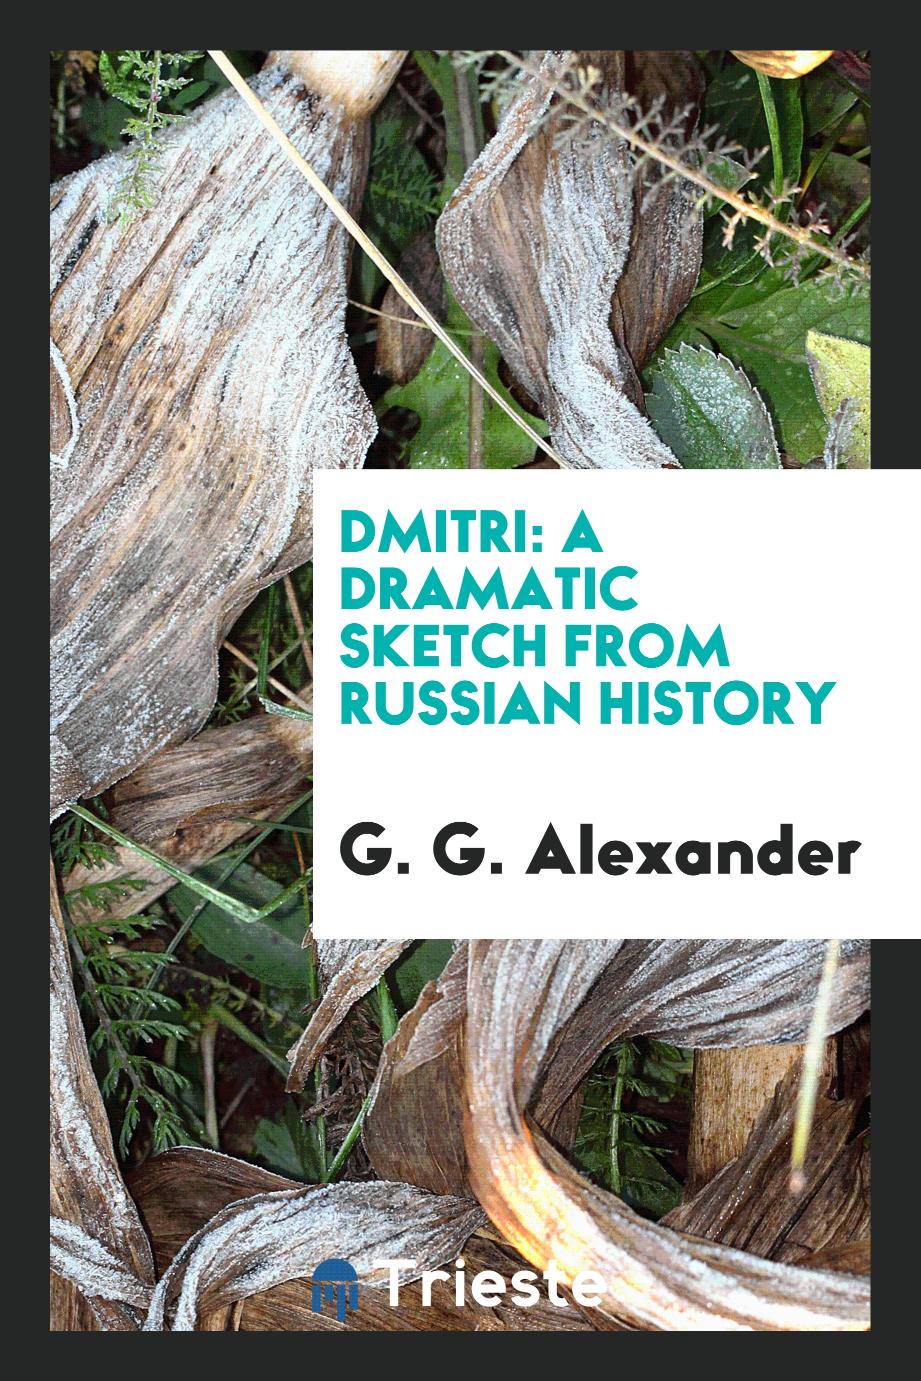 Dmitri: A Dramatic Sketch from Russian History